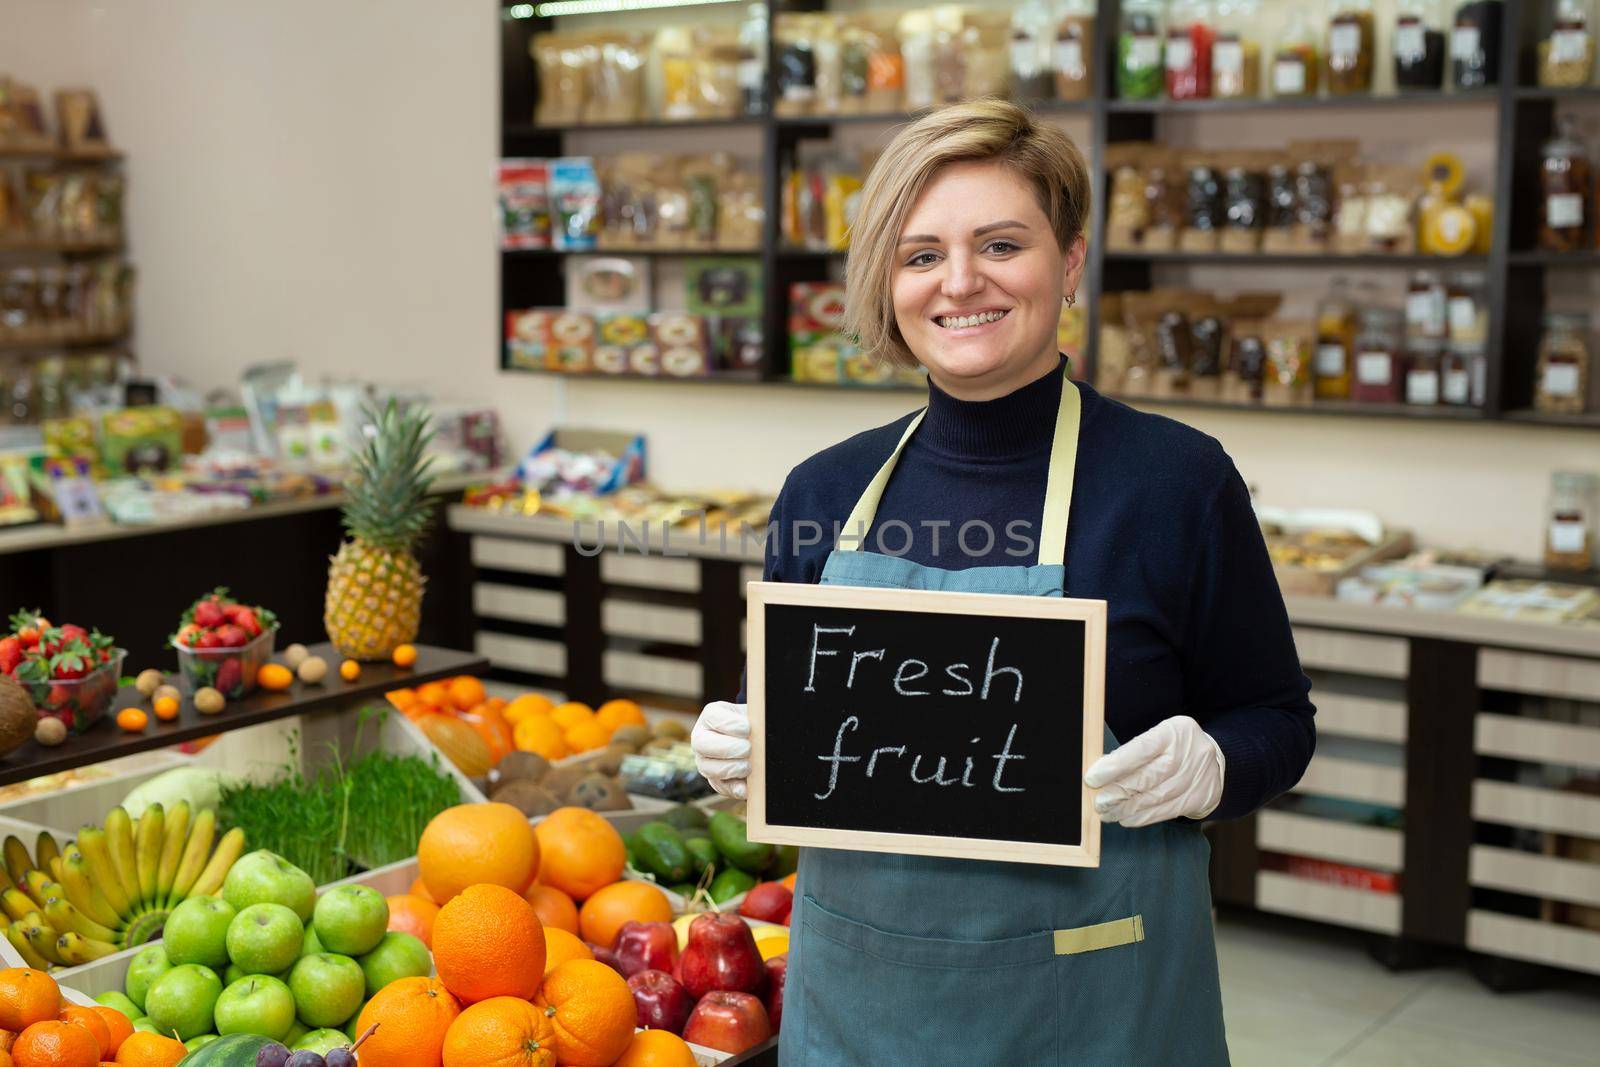 Portrait of a young saleswoman with a sign in her hands fresh fruit.